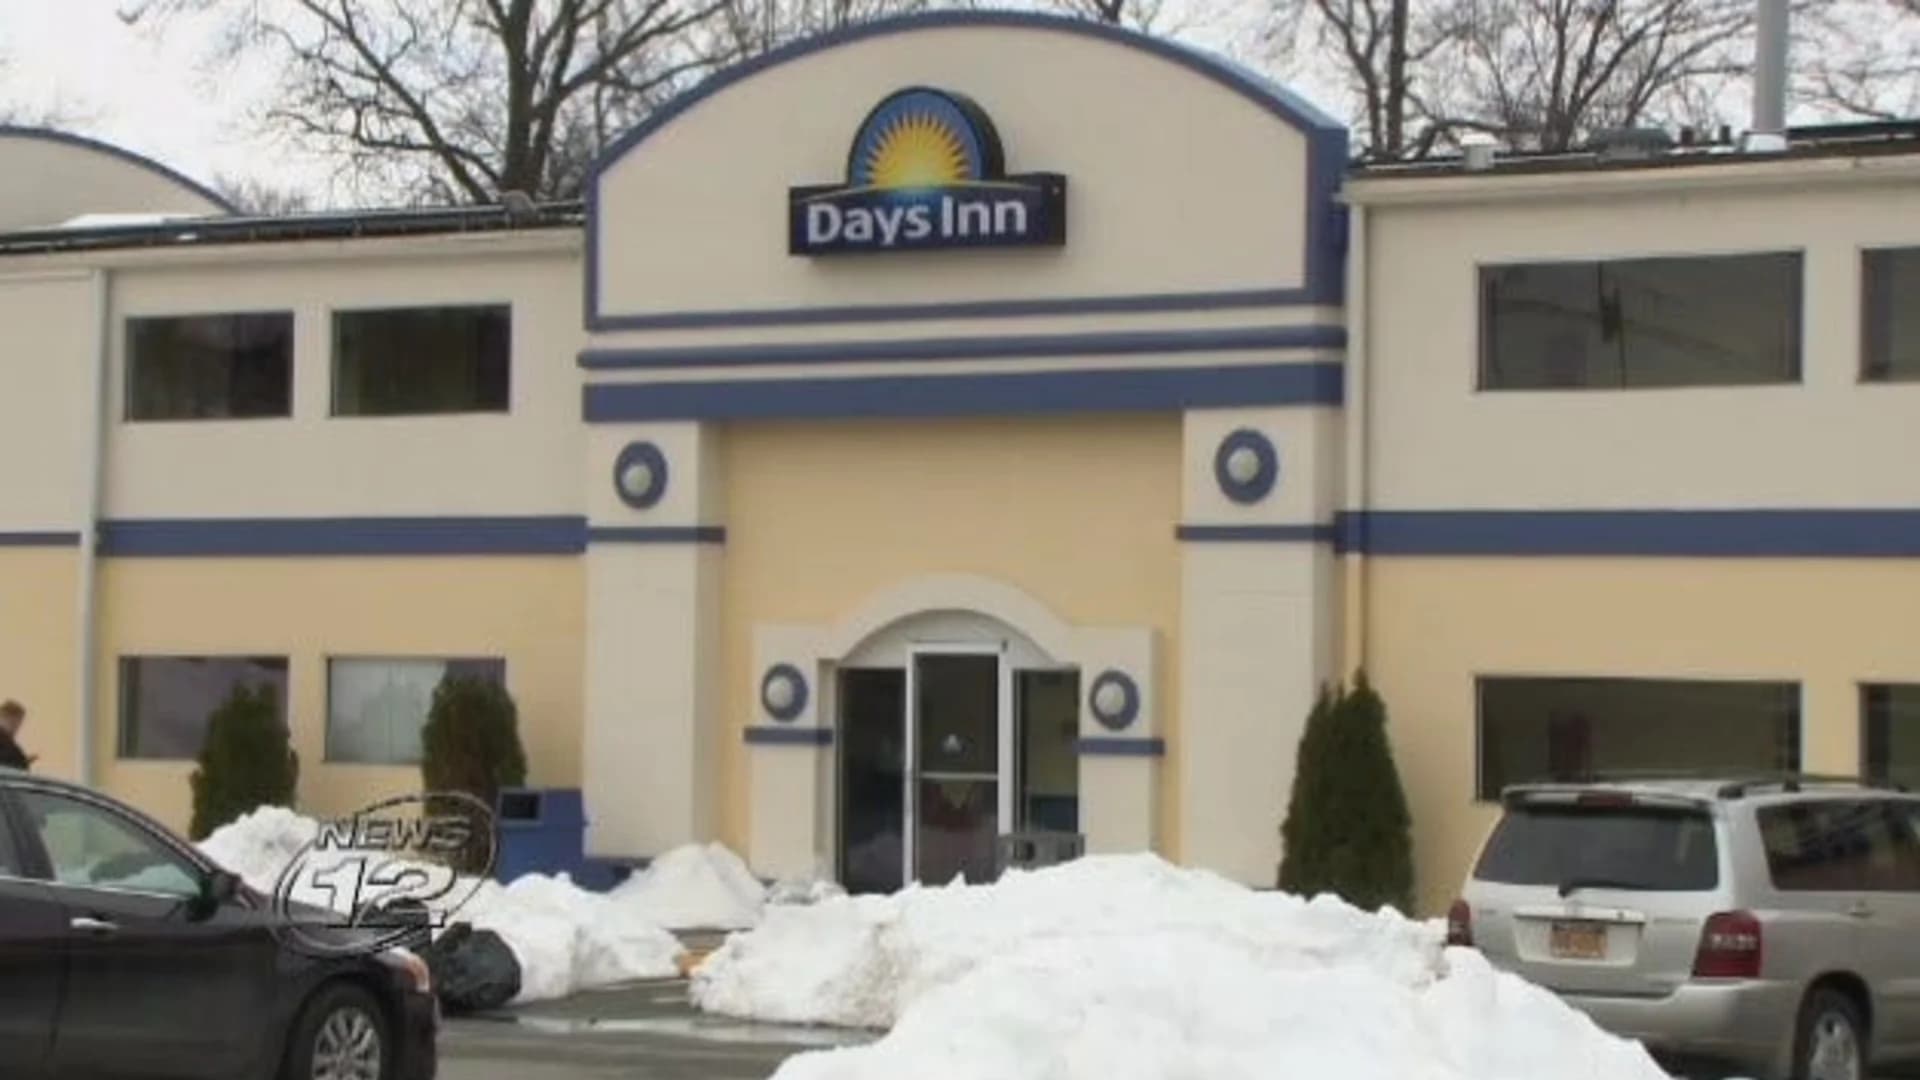 Days Inn to remain open despite officials’ attempt to close it